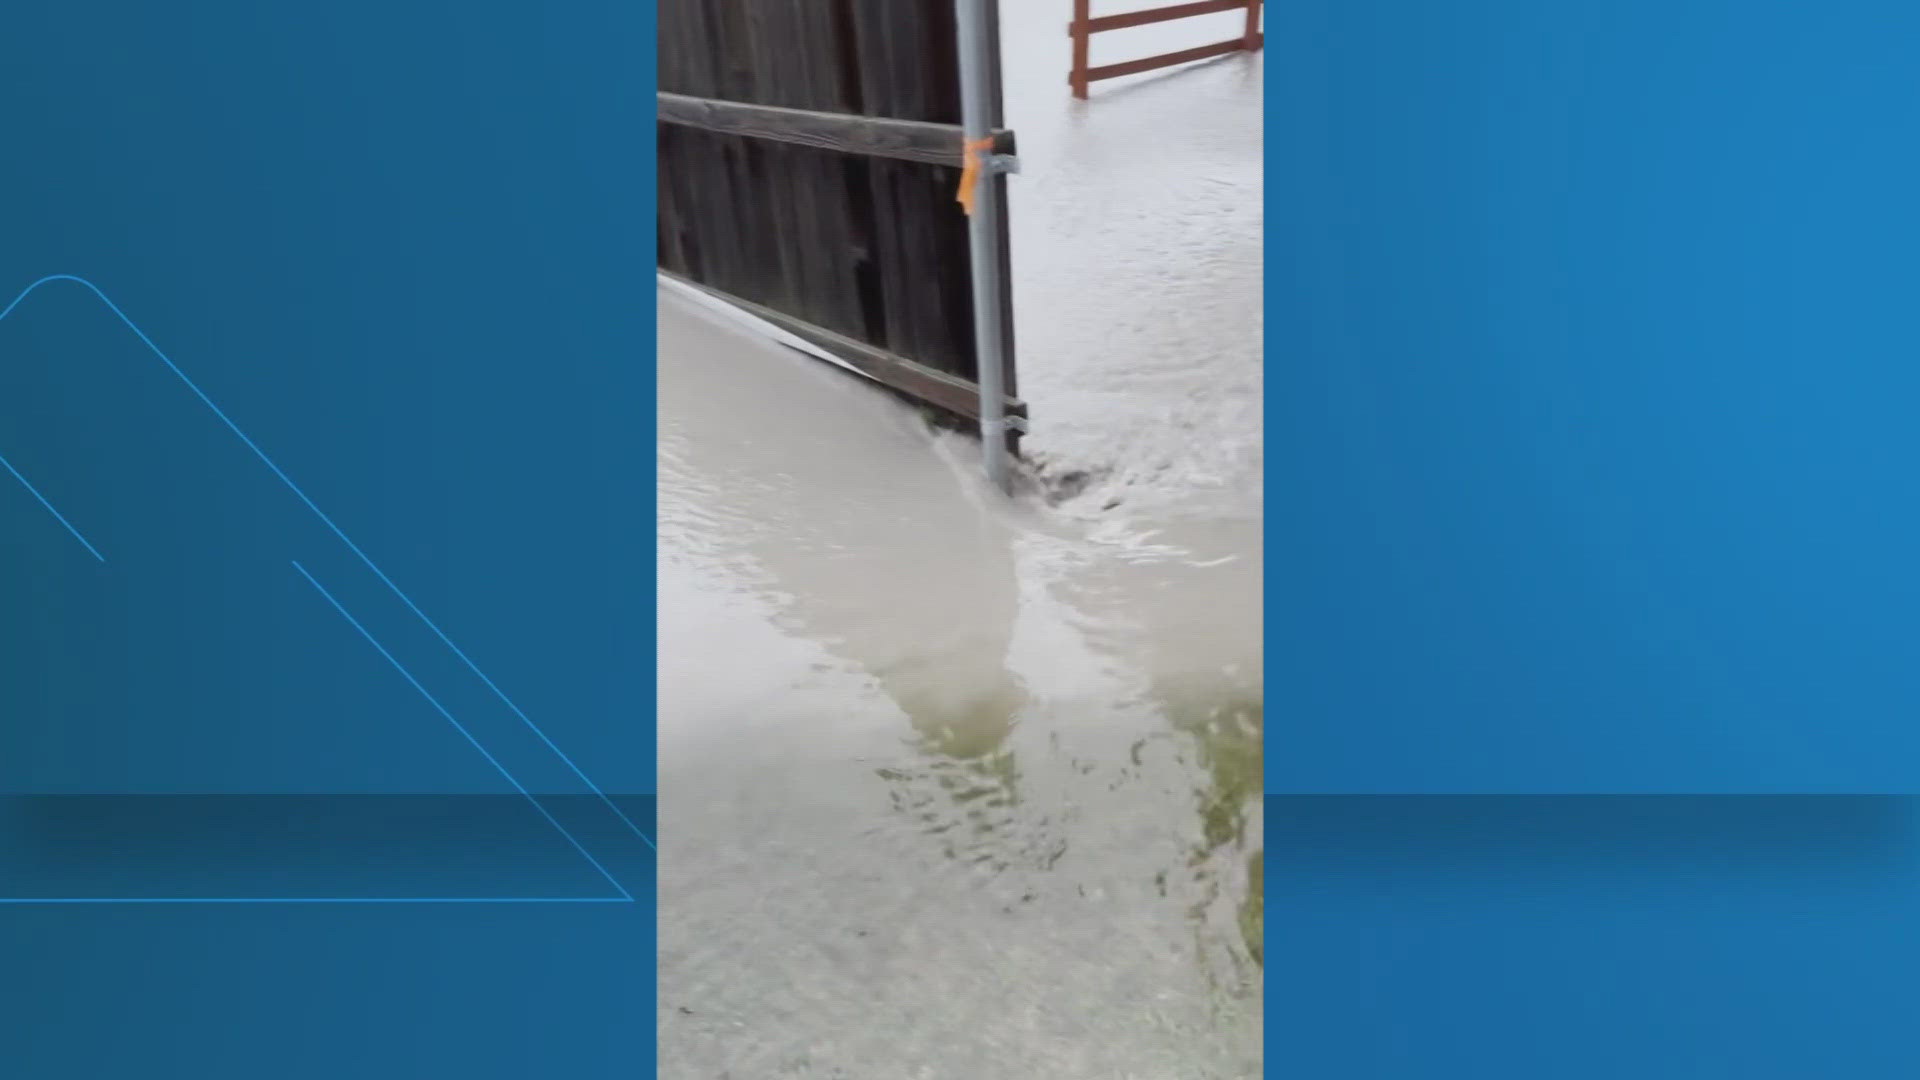 The storms are creating their own issues in Waco and McGregor, where some residents are worried about the effects the downpour will have on them and their property.